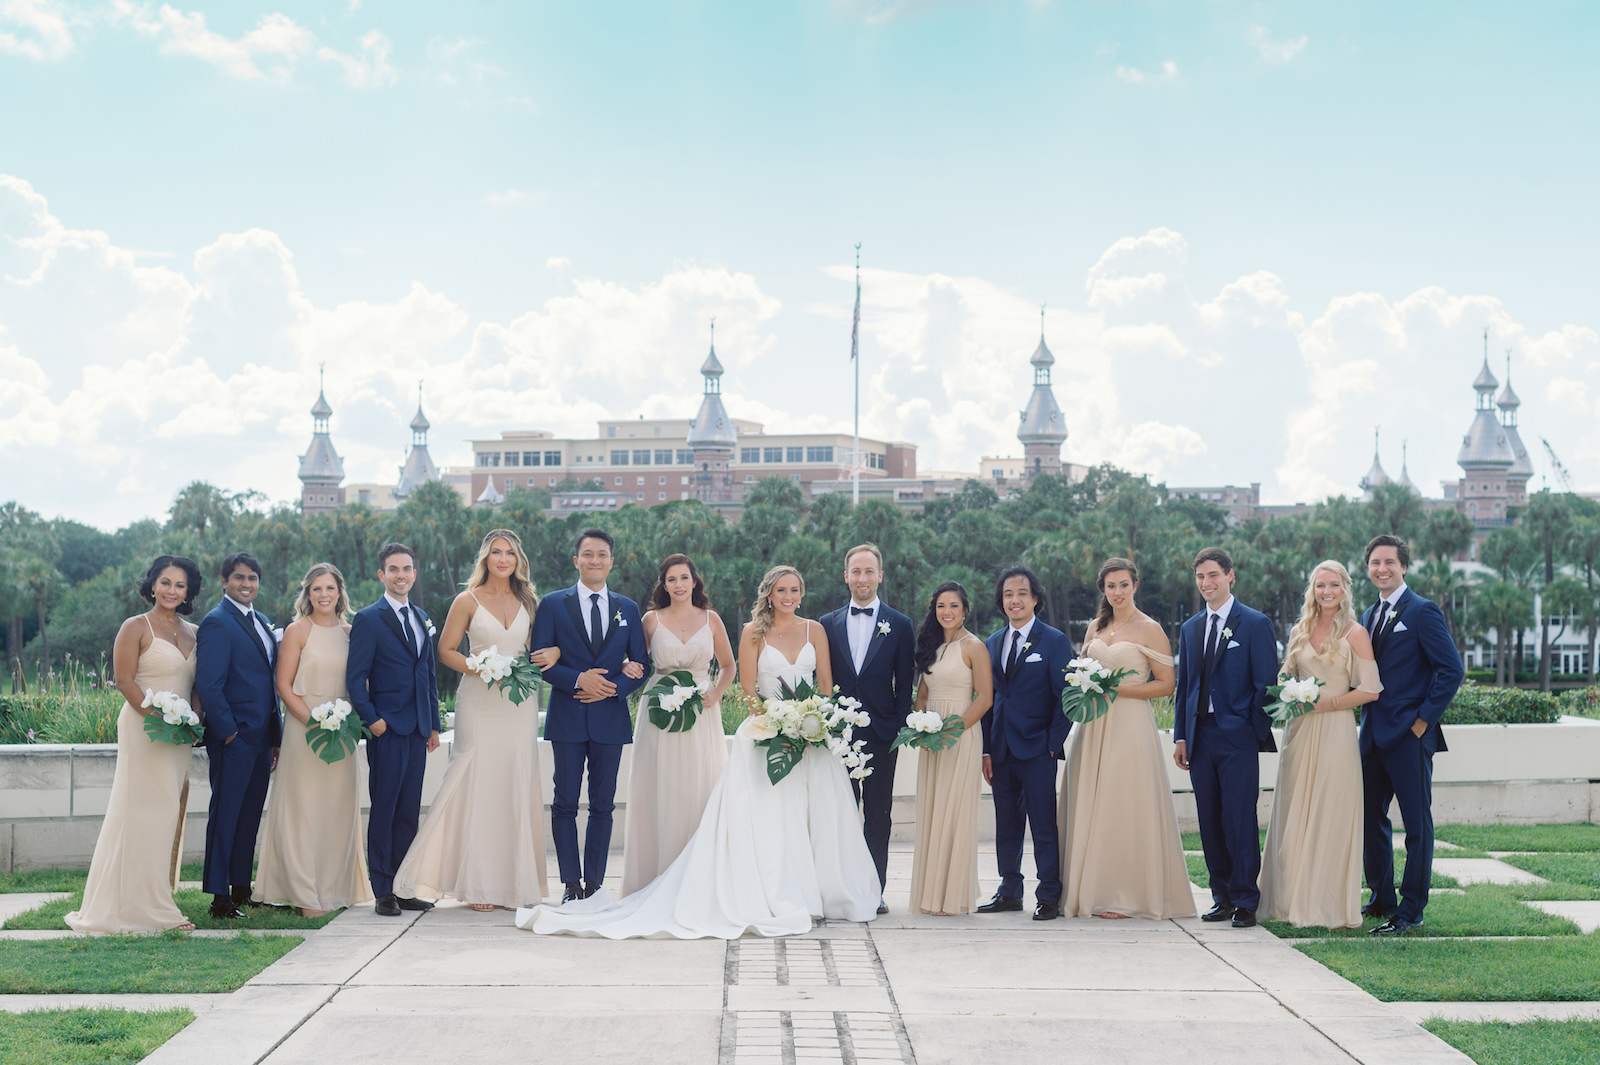 White and Green Modern Minimalist Tropical Wedding Party, Bride and Groom Kissing, Bridesmaids in Mix and Match Champagne Dresses, Groomsmen in Navy Blue Suits | Tampa Bay Wedding Hair and Makeup Femme Akoi Beauty Studio | The University of Tampa